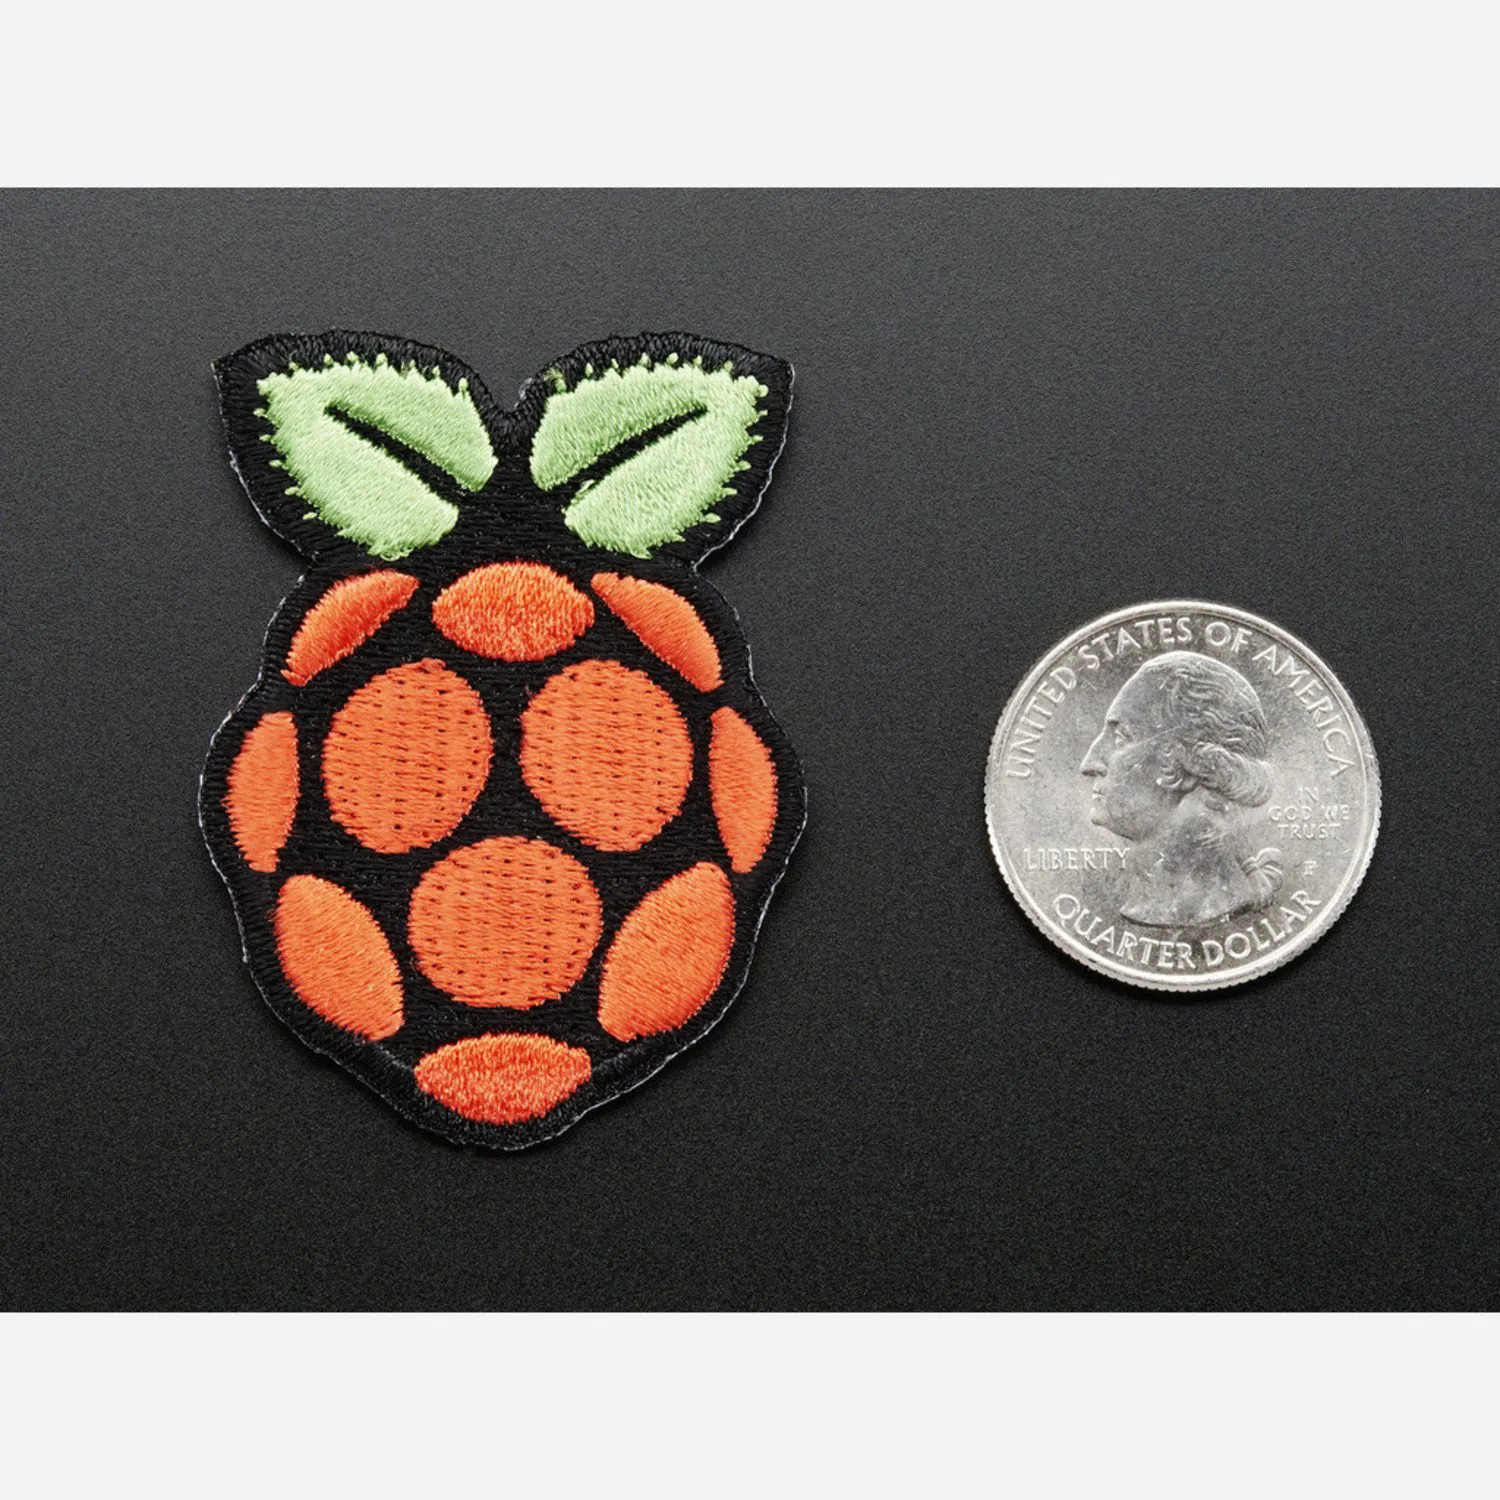 Photo of Raspberry Pi - Skill badge, iron-on patch